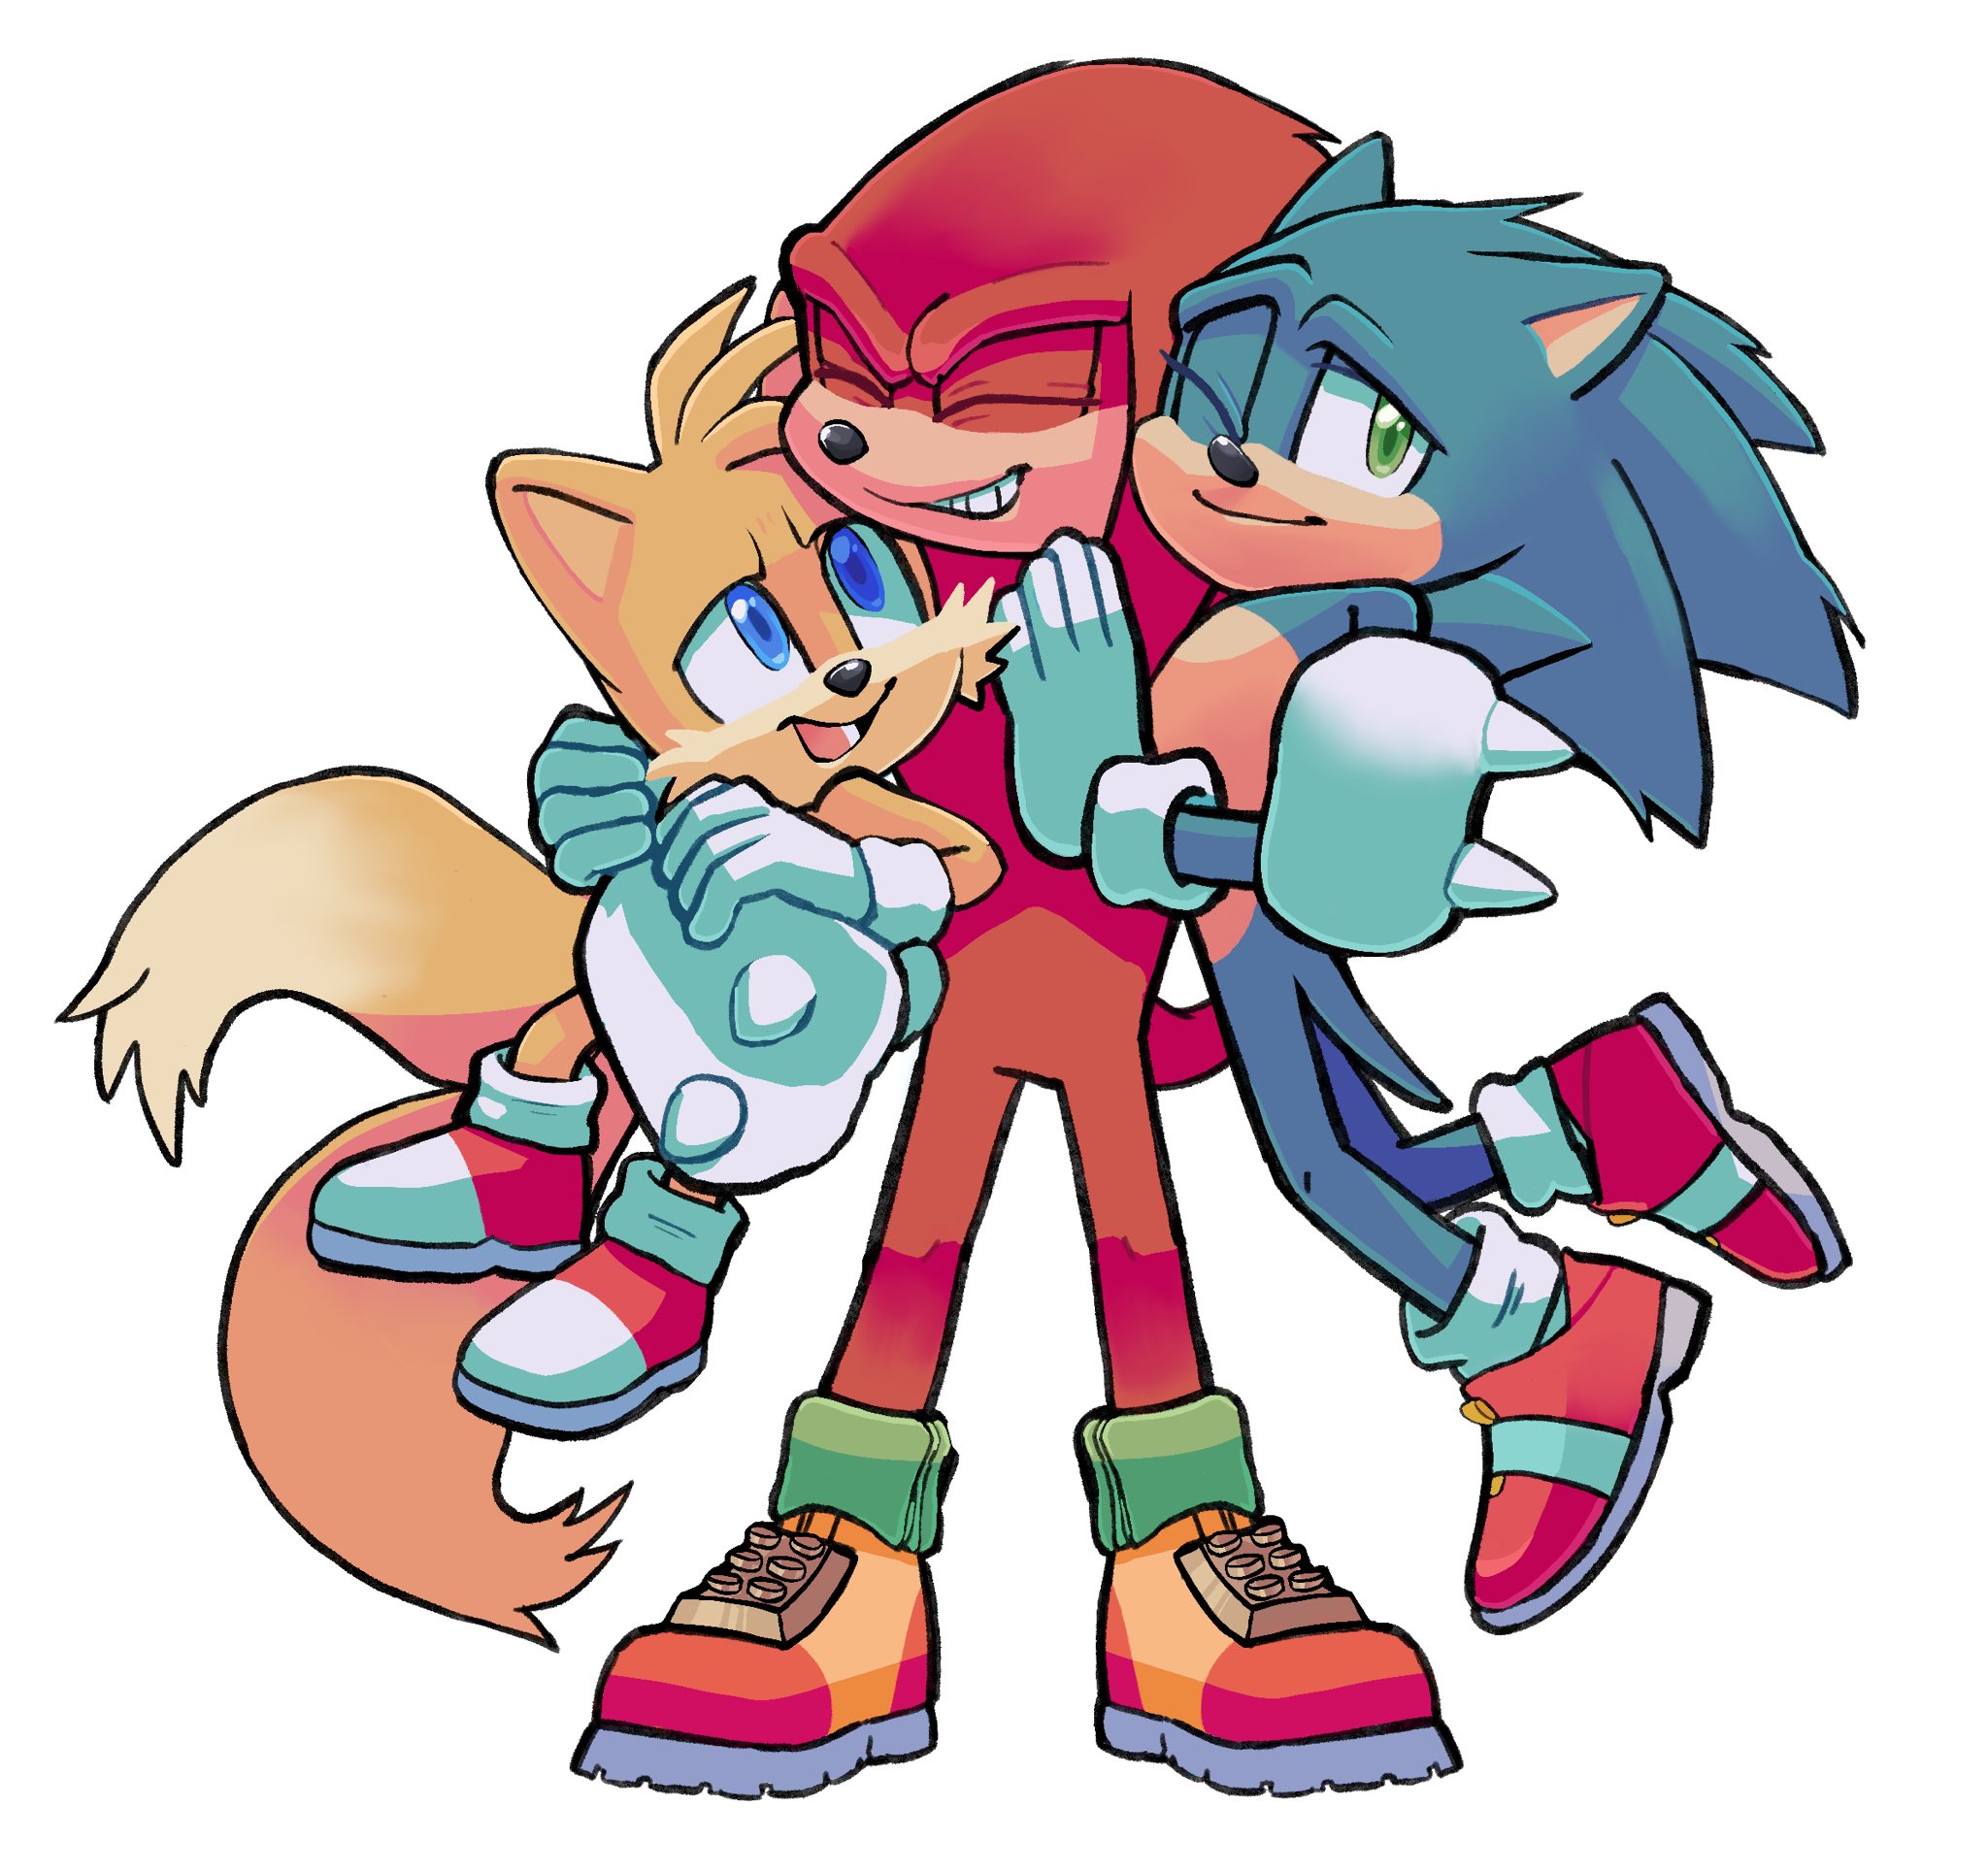 doUble U on X: Finally made some actual art in CSP, getting the hang of  it. Can't wait to watch the Sonic Movie 2 tbh #SonicTheHedgehog #Sonic  #sonicfanart  / X